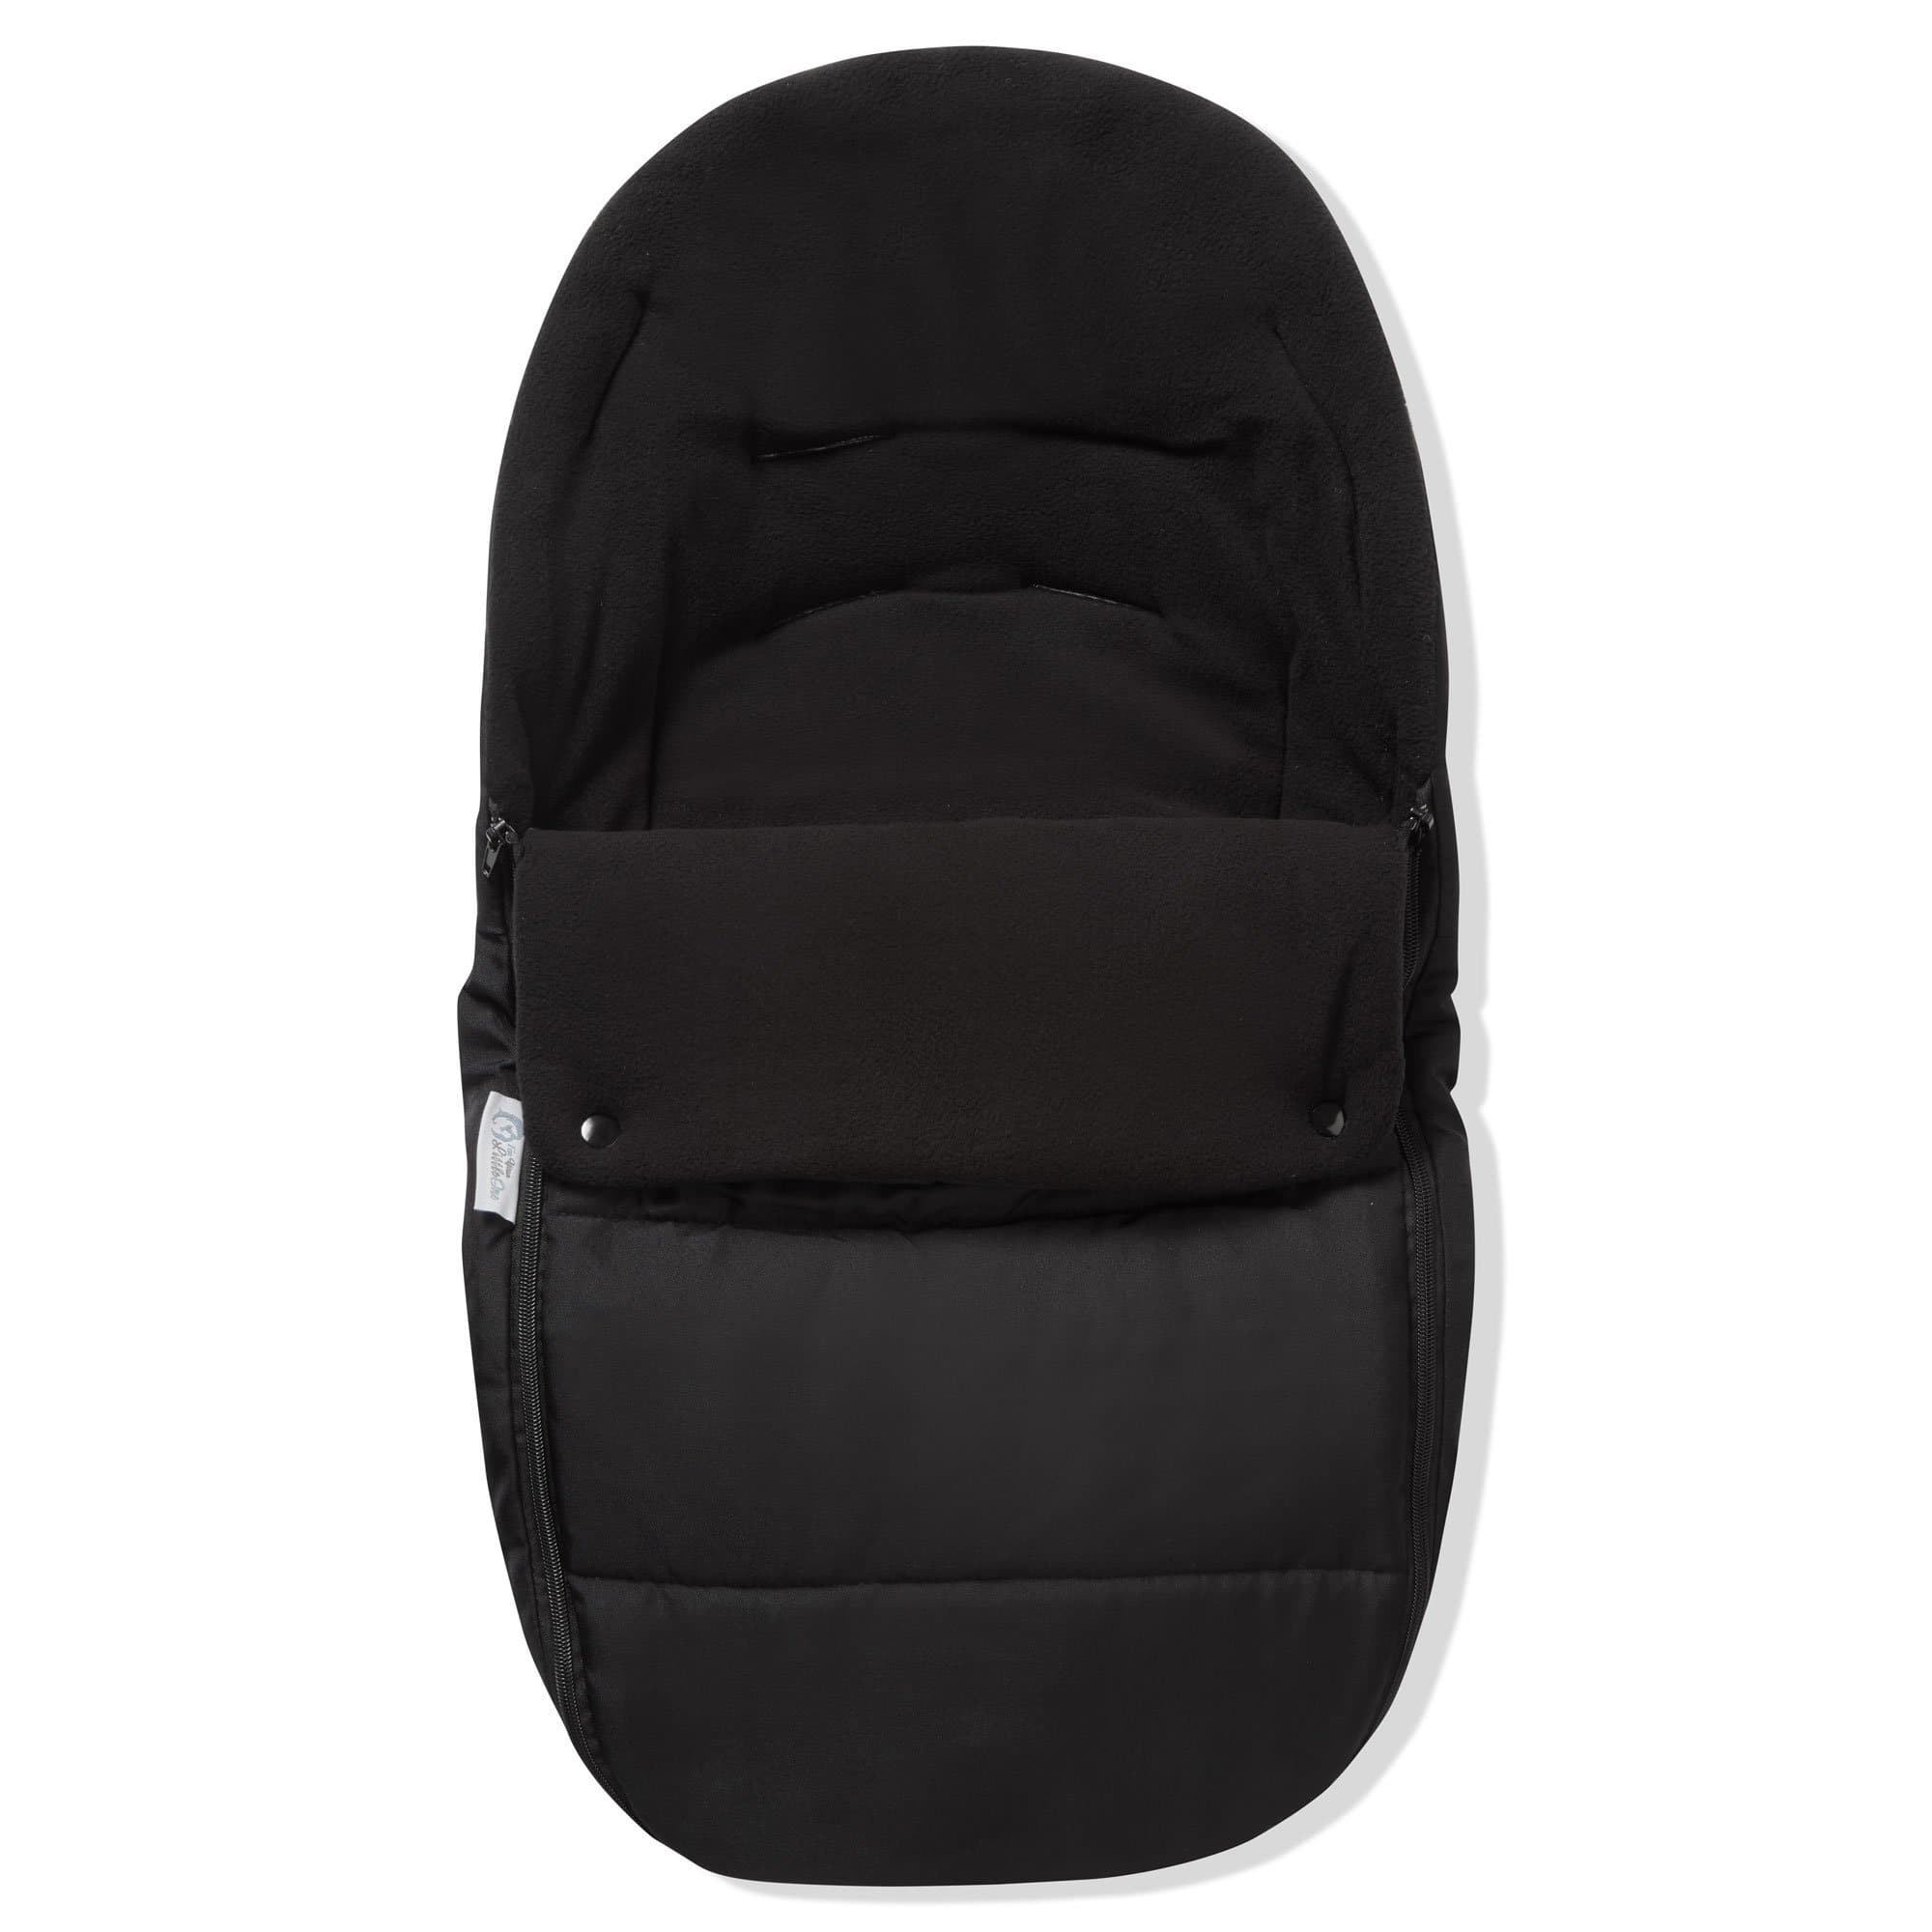 Premium Car Seat Footmuff / Cosy Toes Compatible With Mountain Buggy - Black Jack / Fits All Models | For Your Little One